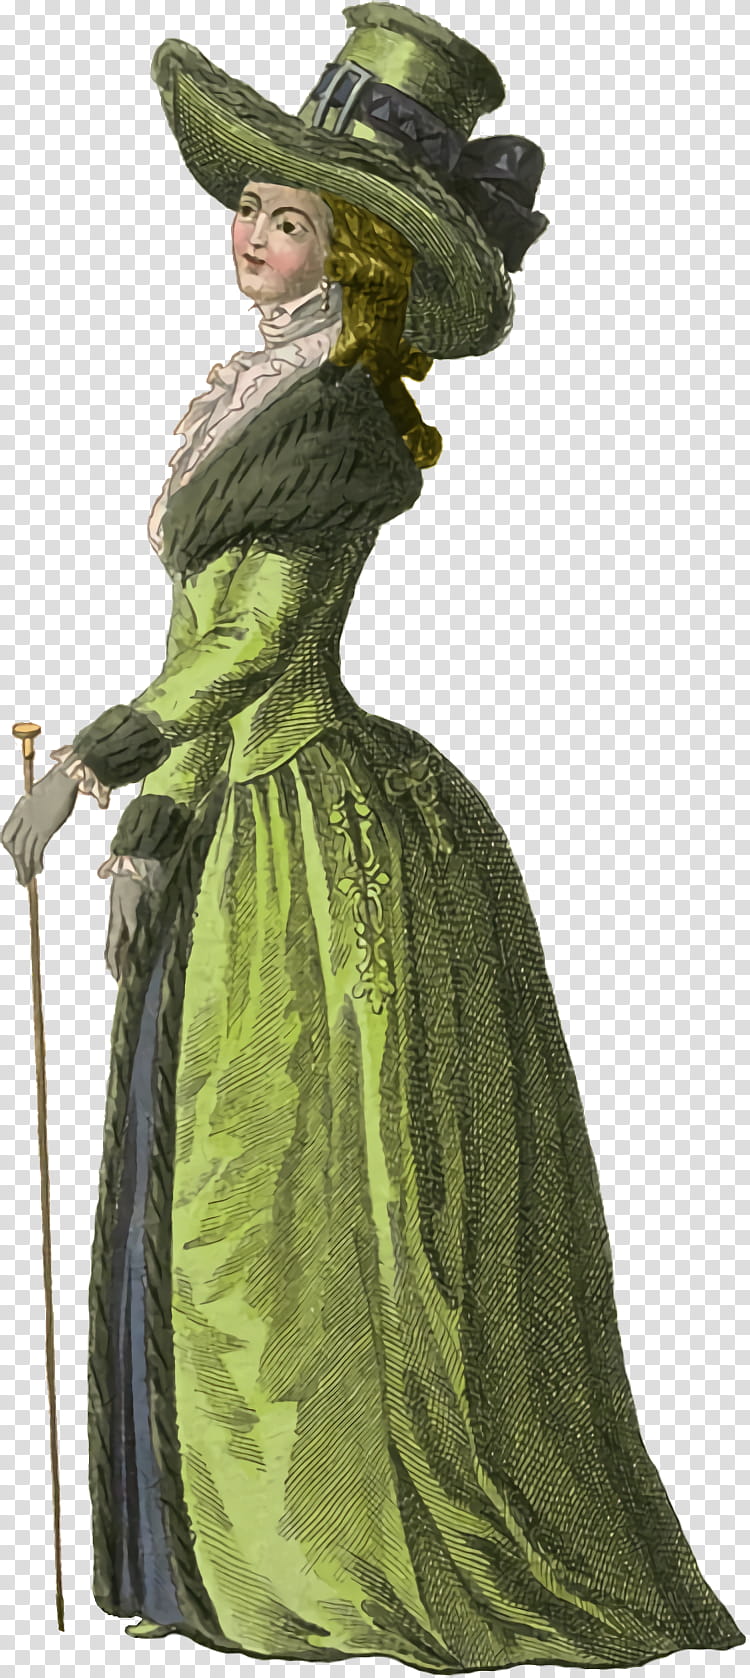 costume design green victorian fashion standing costume, Statue, Gown, Outerwear, Figurine transparent background PNG clipart